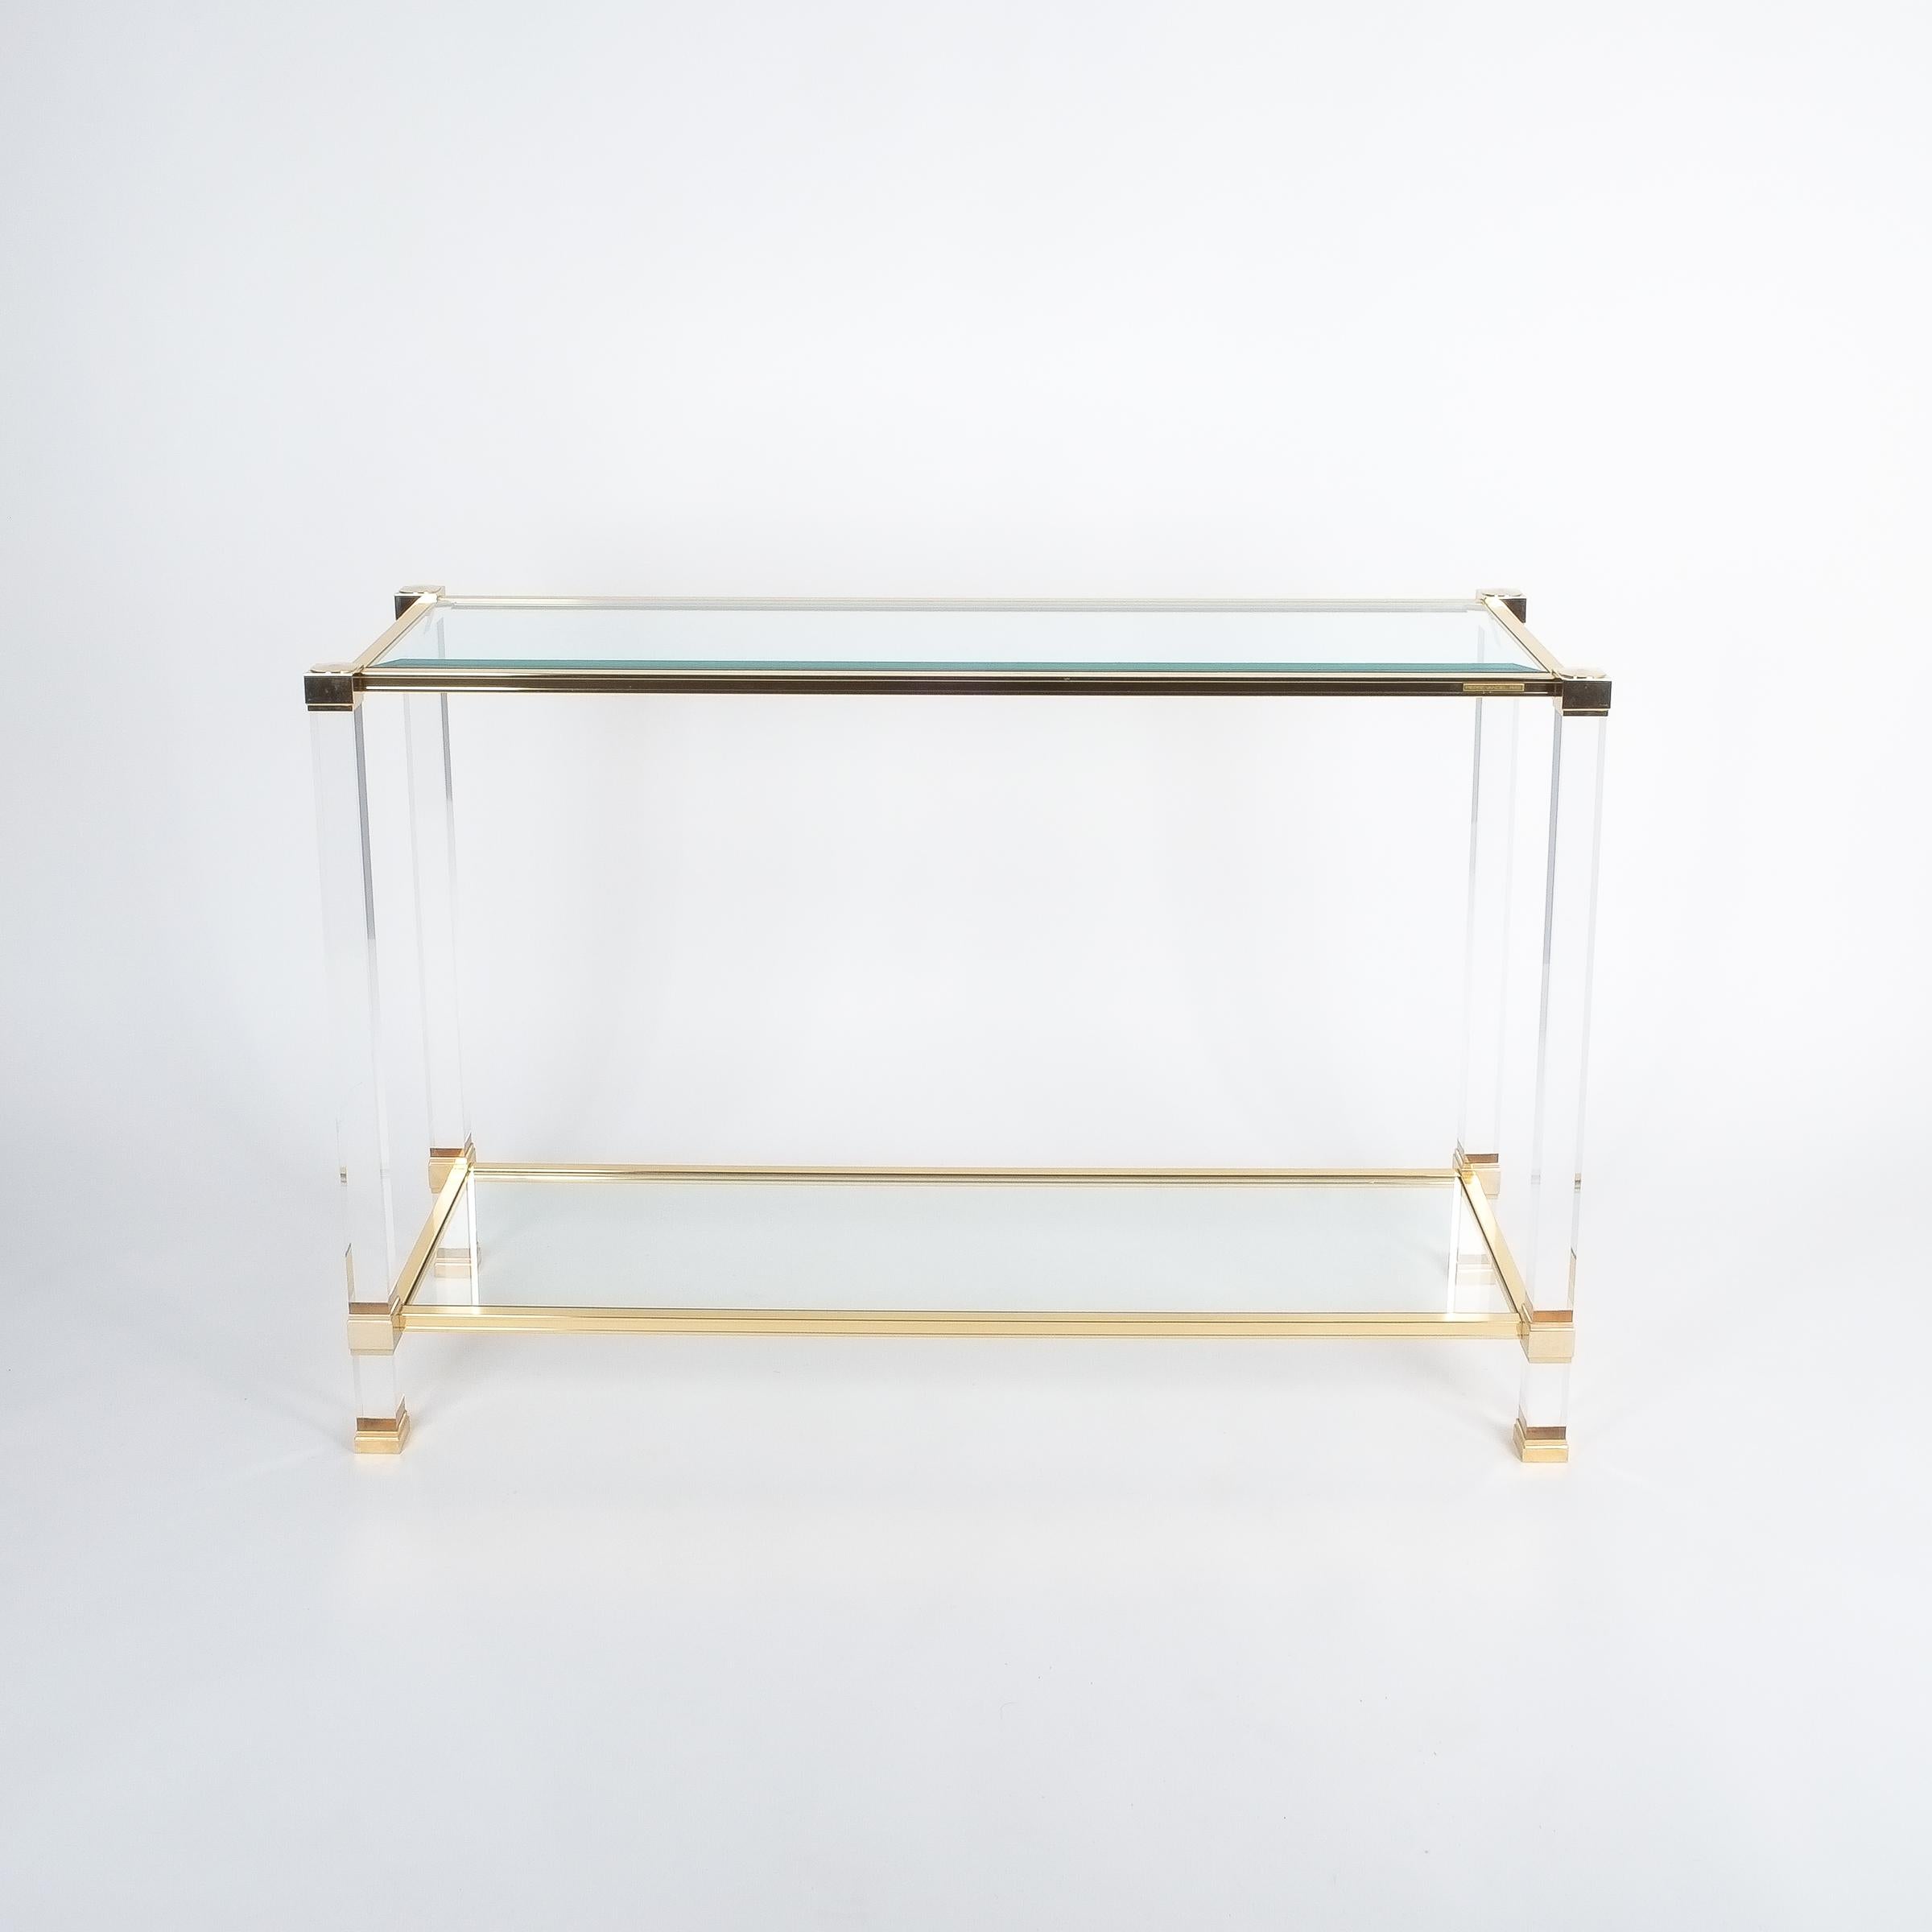 Classical console table by Pierre Vandel/Paris, France. Consisting of Lucite pillars and brassed metal beams. Beveled top glass and normal shelf glass both with no chips. The table is in good to excellent condition. Labelled Pierre Vandel.